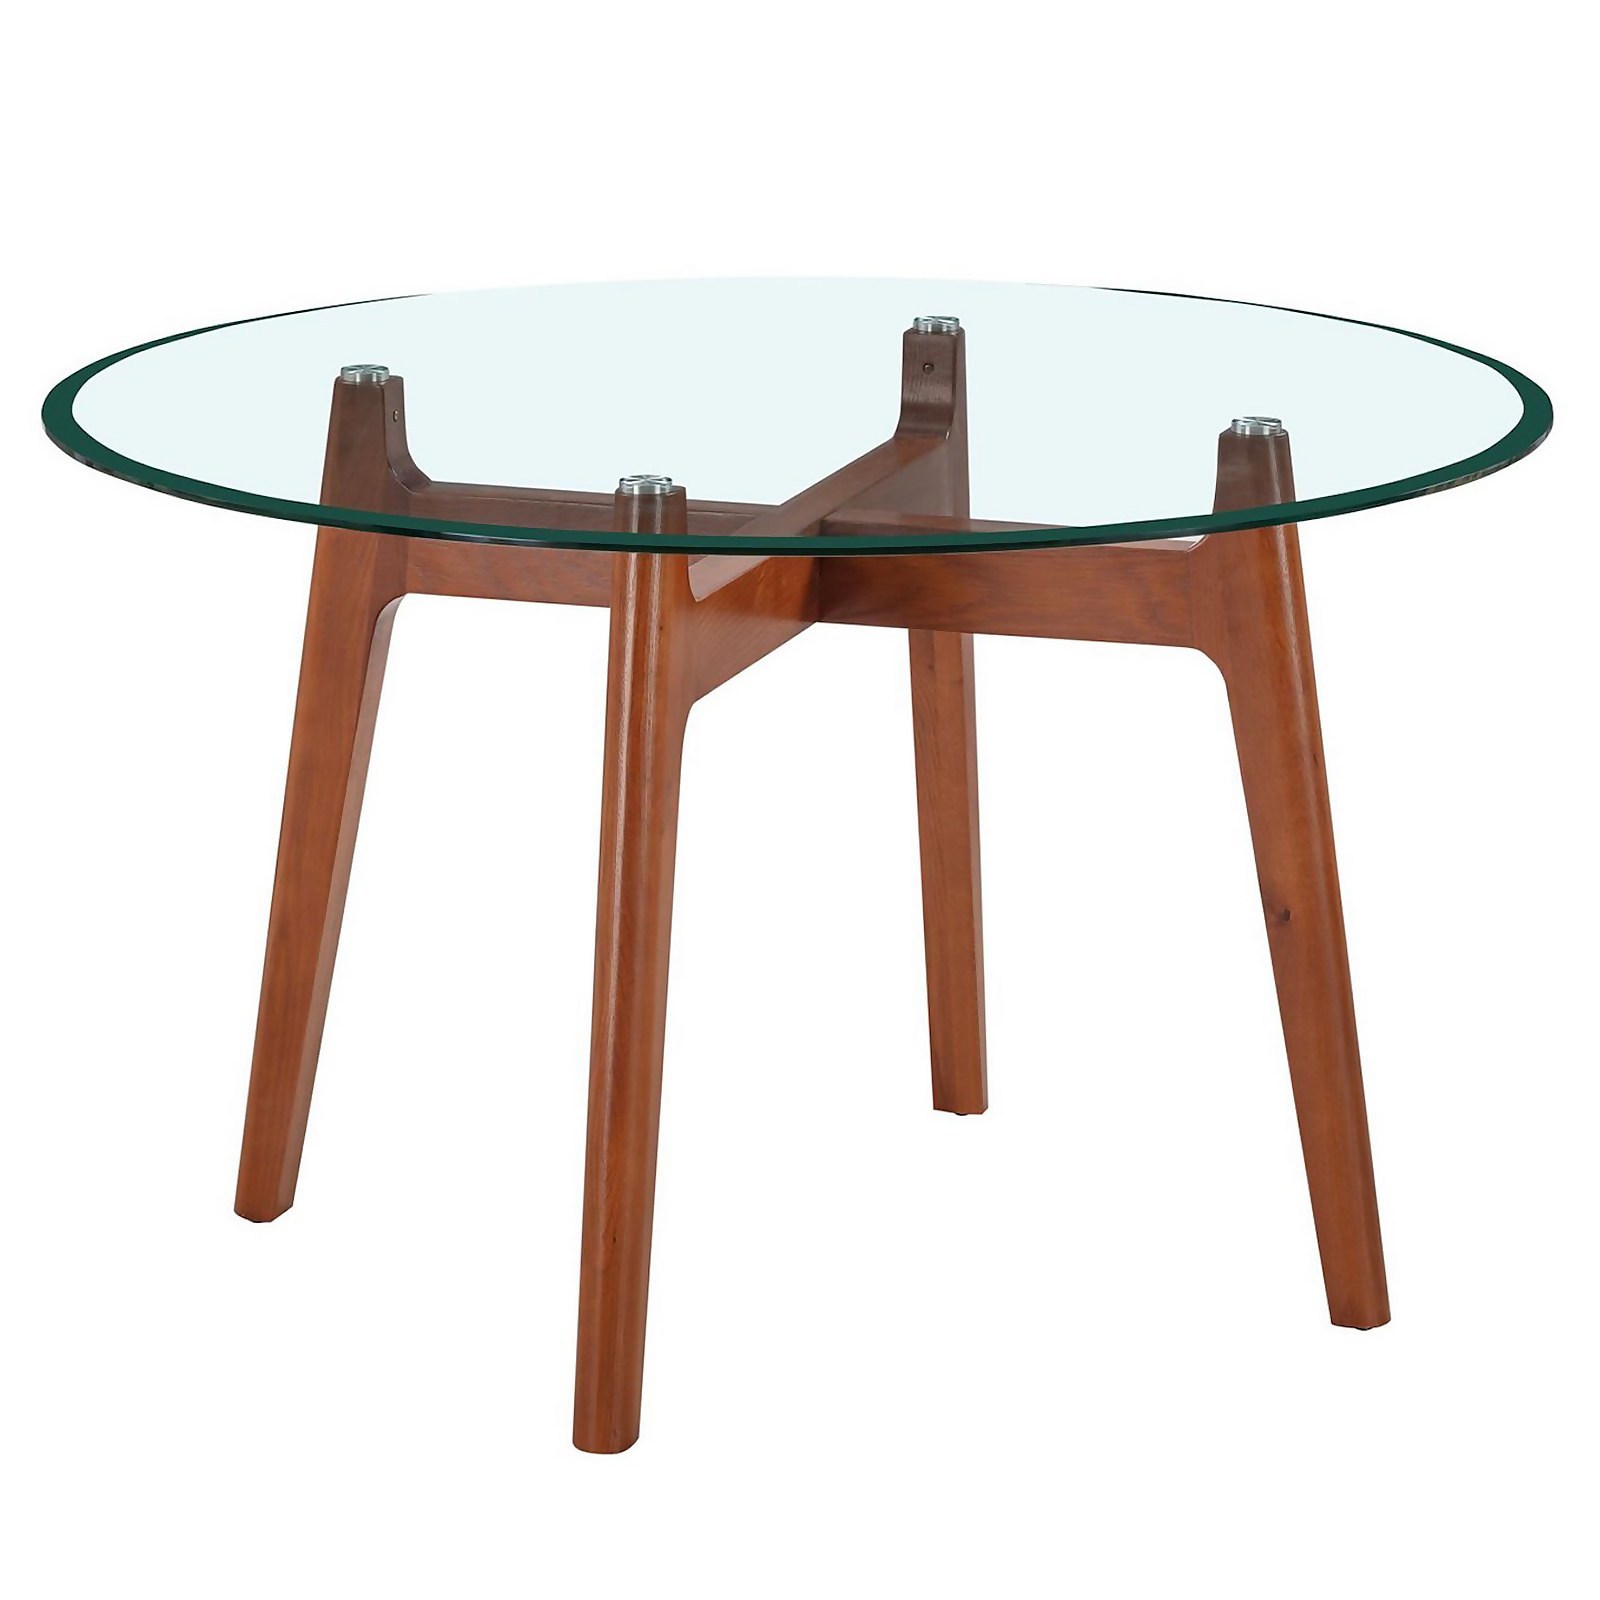 Baxter Glass & Oak Round Dining Table